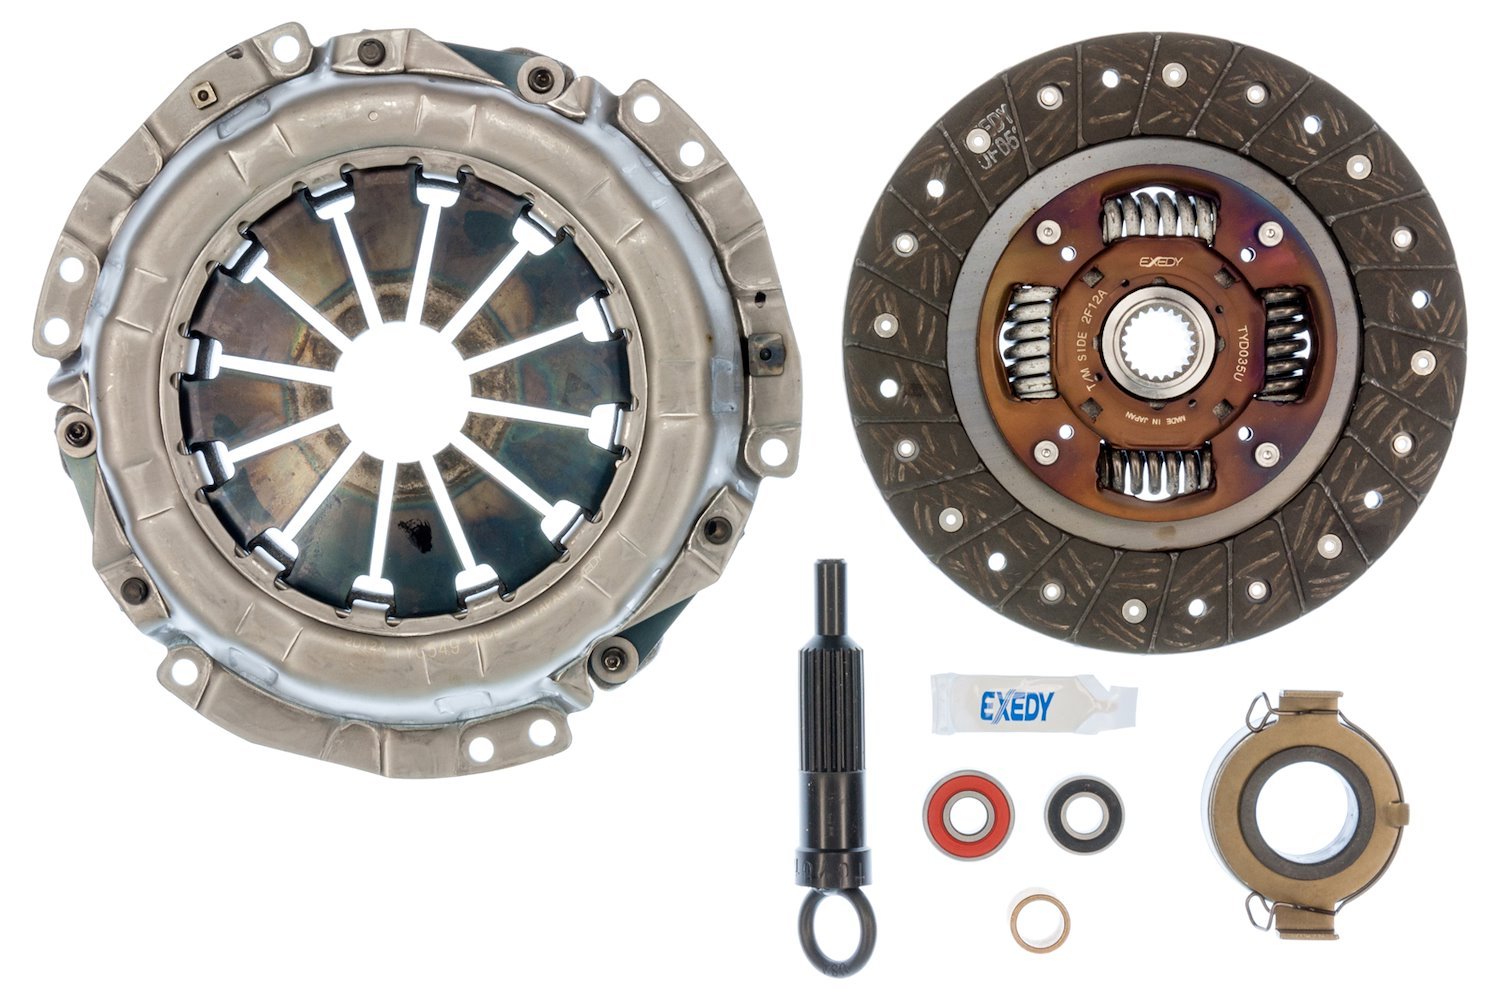 KTY18 OEM Replacement Transmission Clutch Kit, 1994-1997 Toyota Celica L4